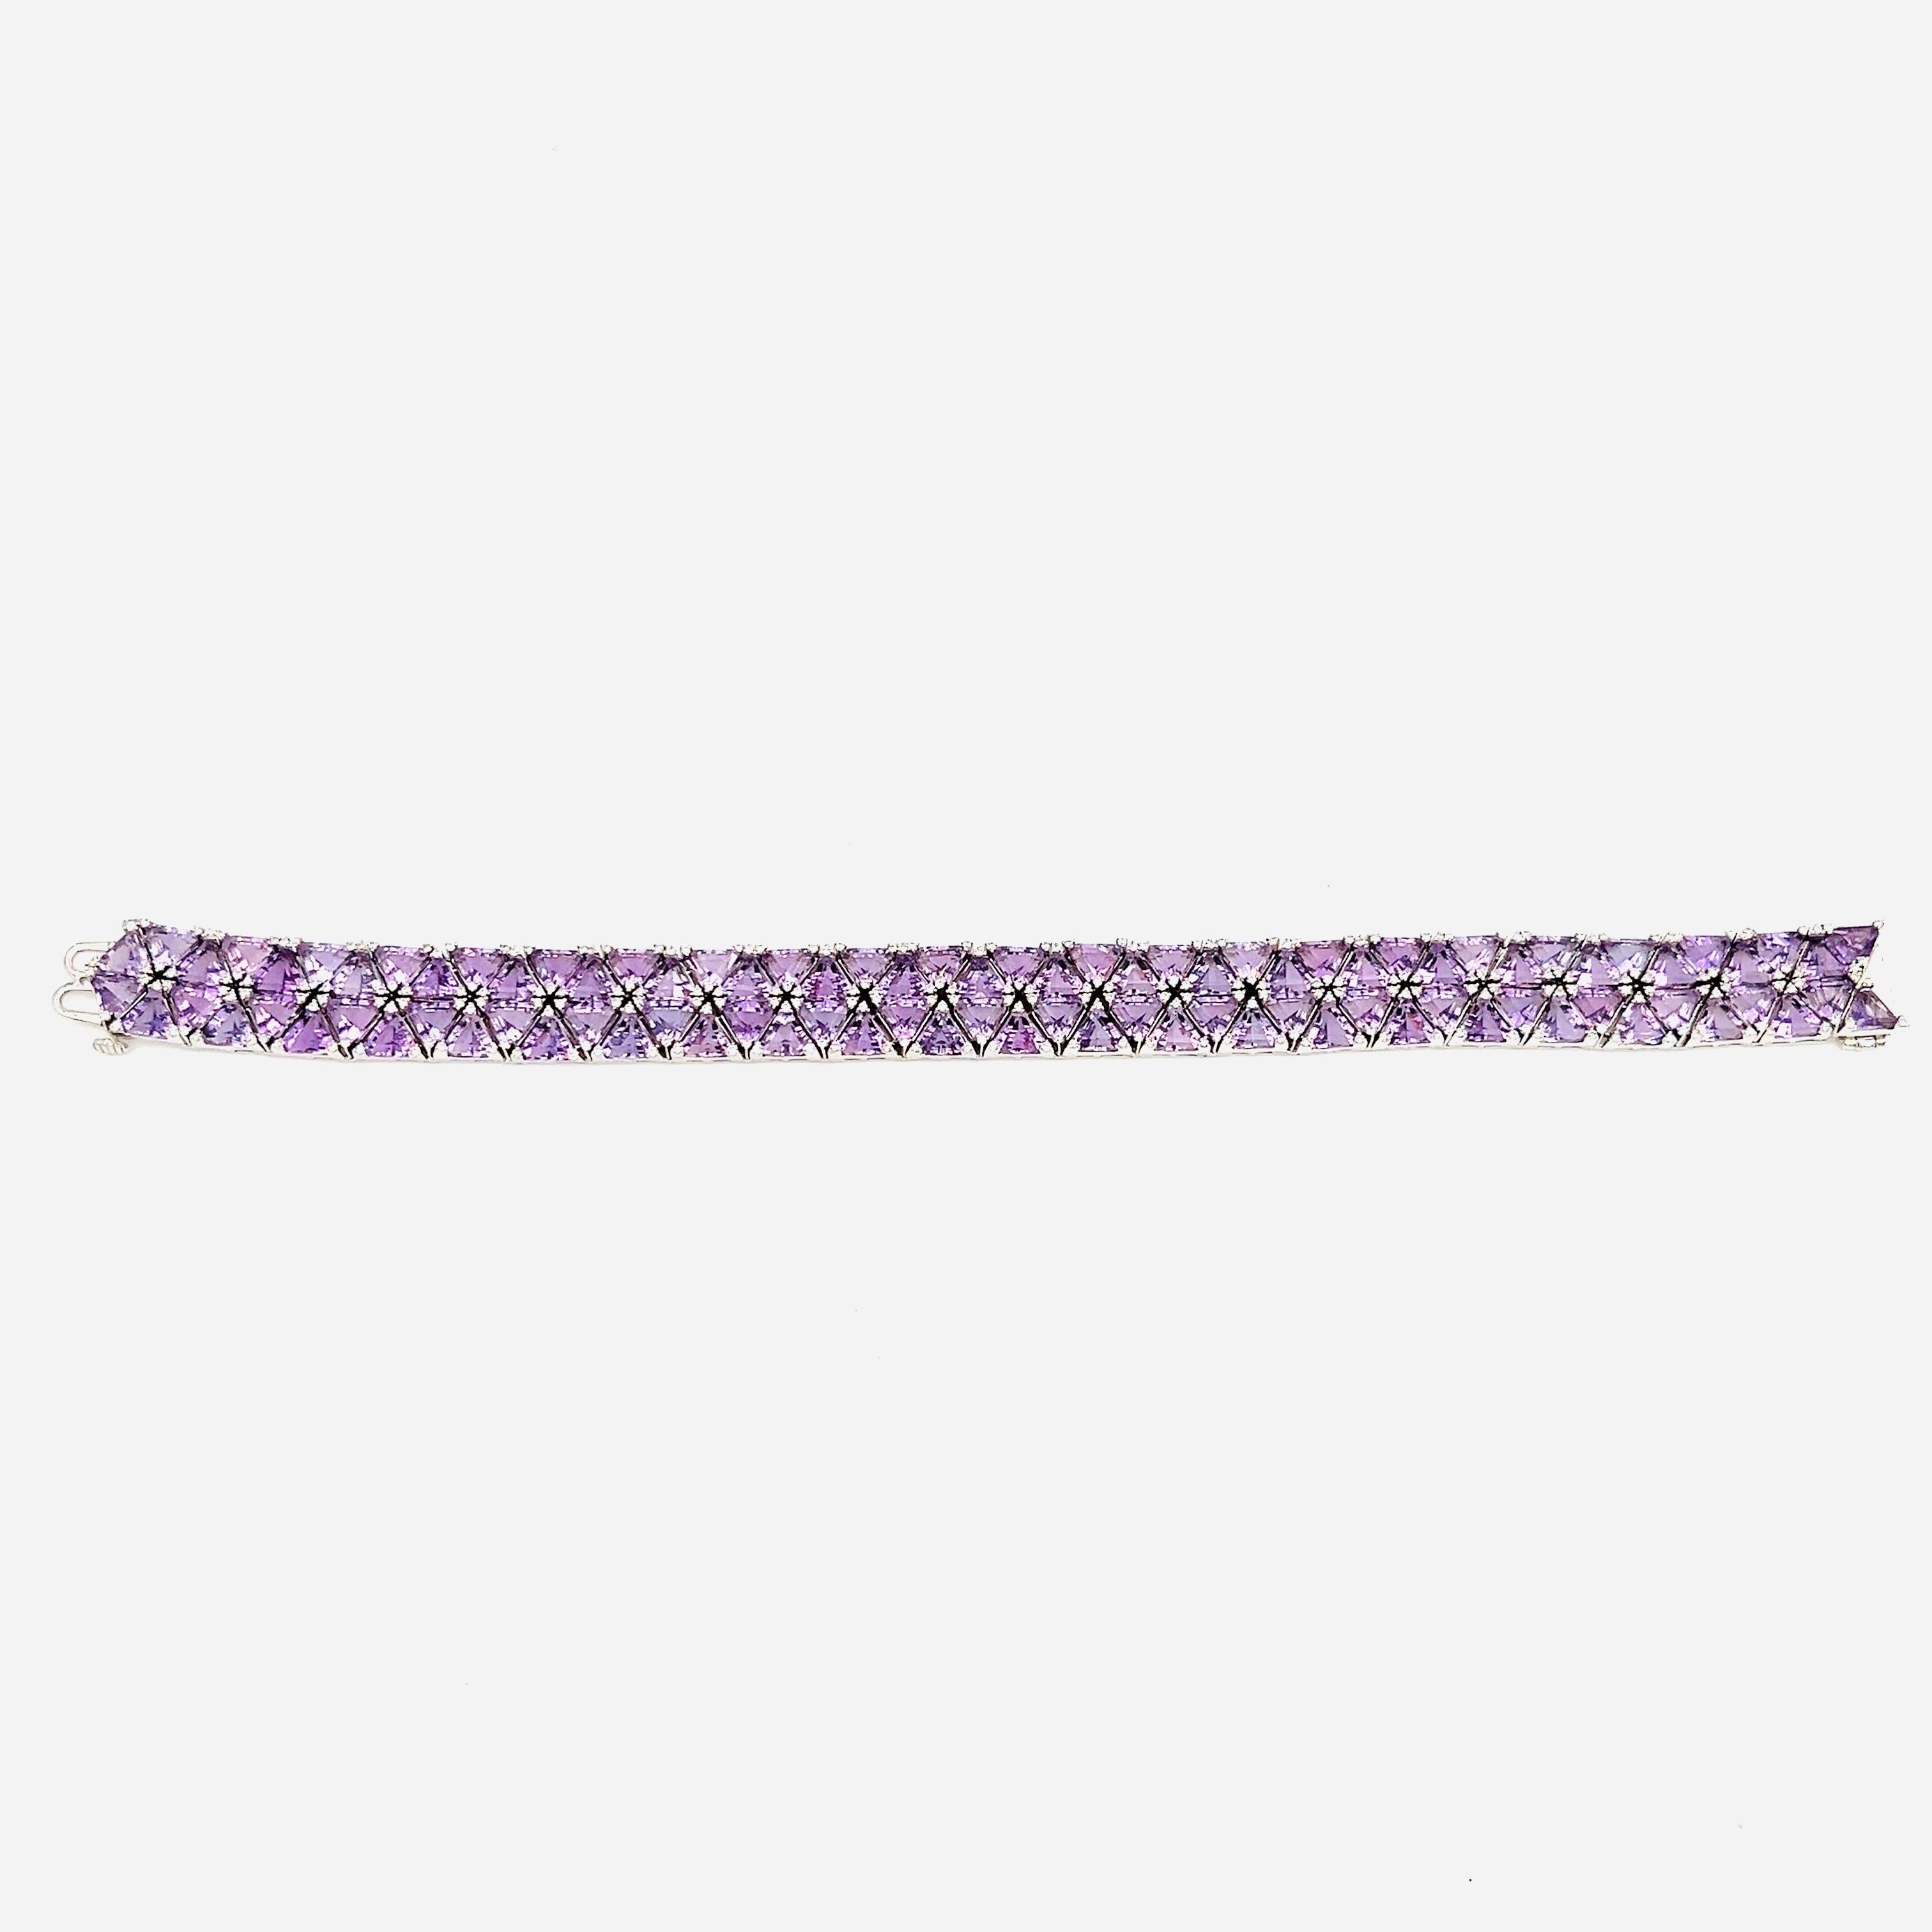 This amazing natural amethyst and diamond bracelet boasts a total of 41.29 ct. The bracelet features 92 trillion shaped natural amethysts weighing 39.90 ct. The 276 diamonds on the bracelet make up 1.39 ct and are F/G in color and VS2/SI1 in